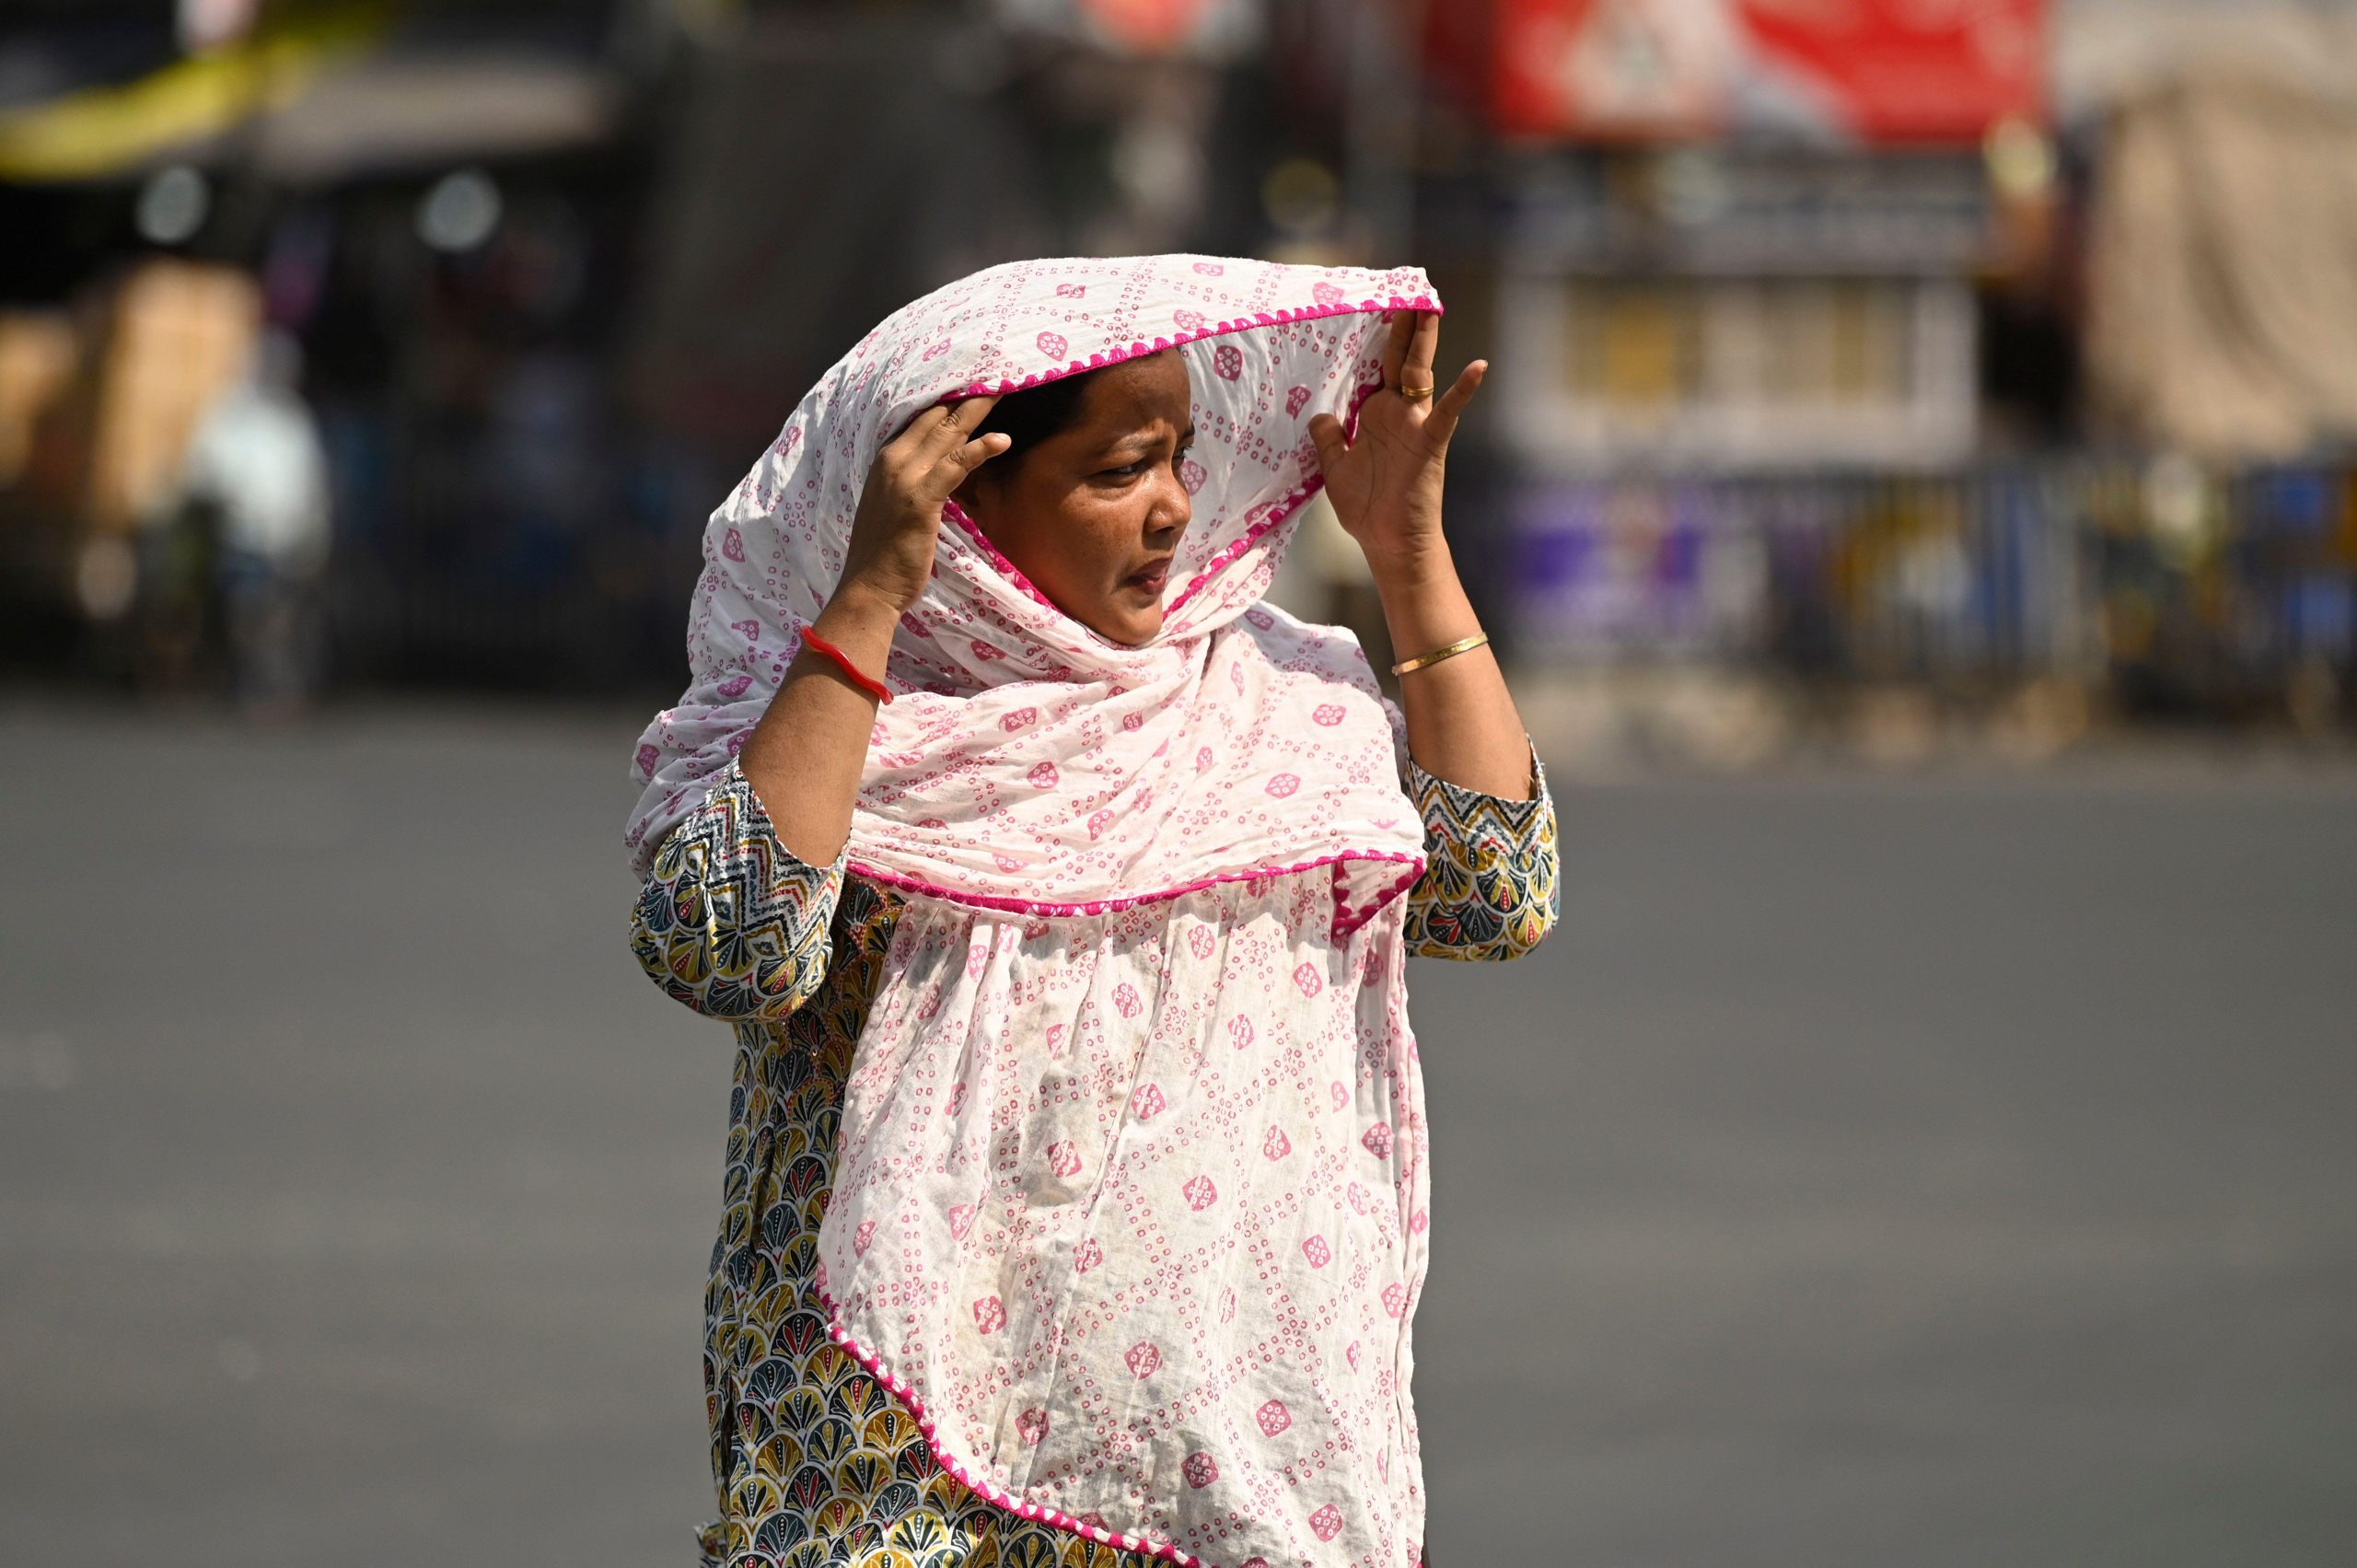 <p class="p1">A commuter in Kolkata, India covers her face with cloth to protect herself from heat on a hot summer day. (Image: Samir Jana/Alamy)</p>